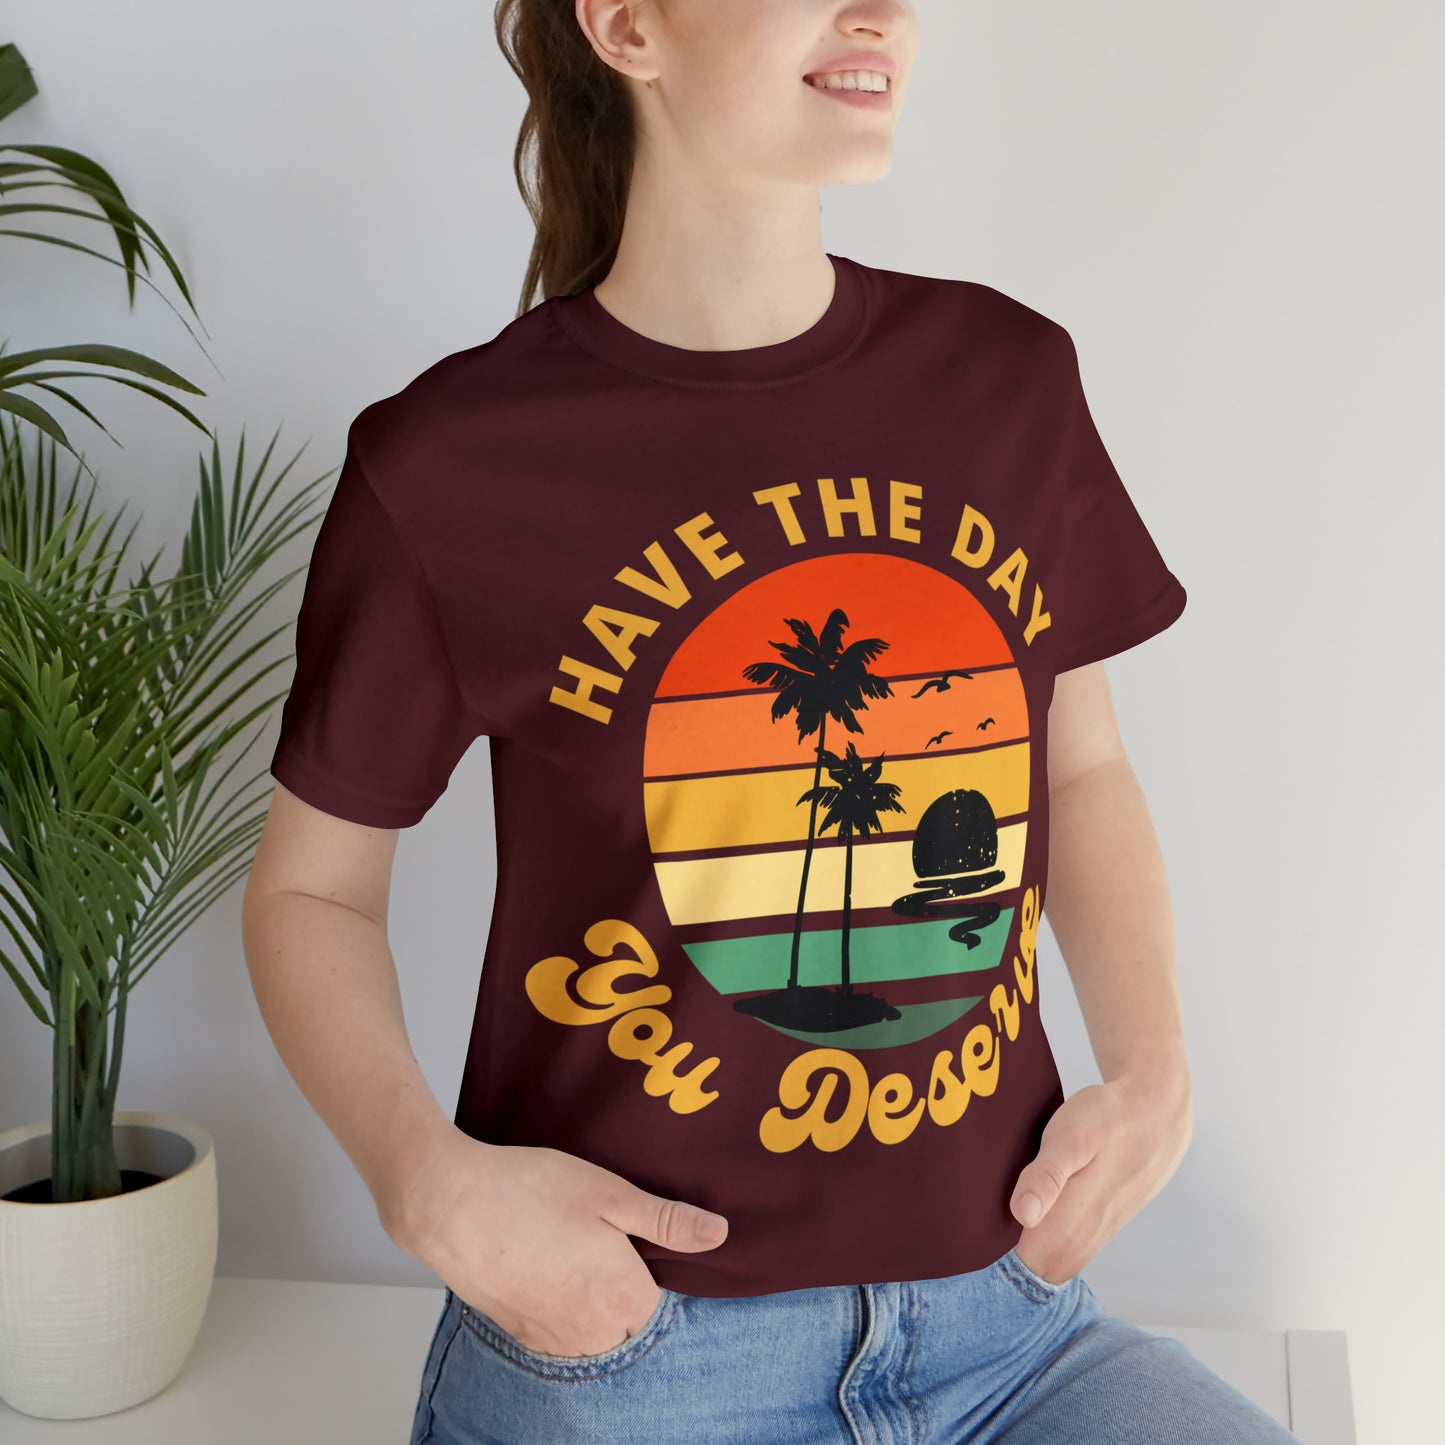 Inspirational Graphic Tee, Motivational Tee, Have the Day You Deserve Shirt, Positive Vibes Shirt, Trendy shirt and Eye Catching shirt Beach